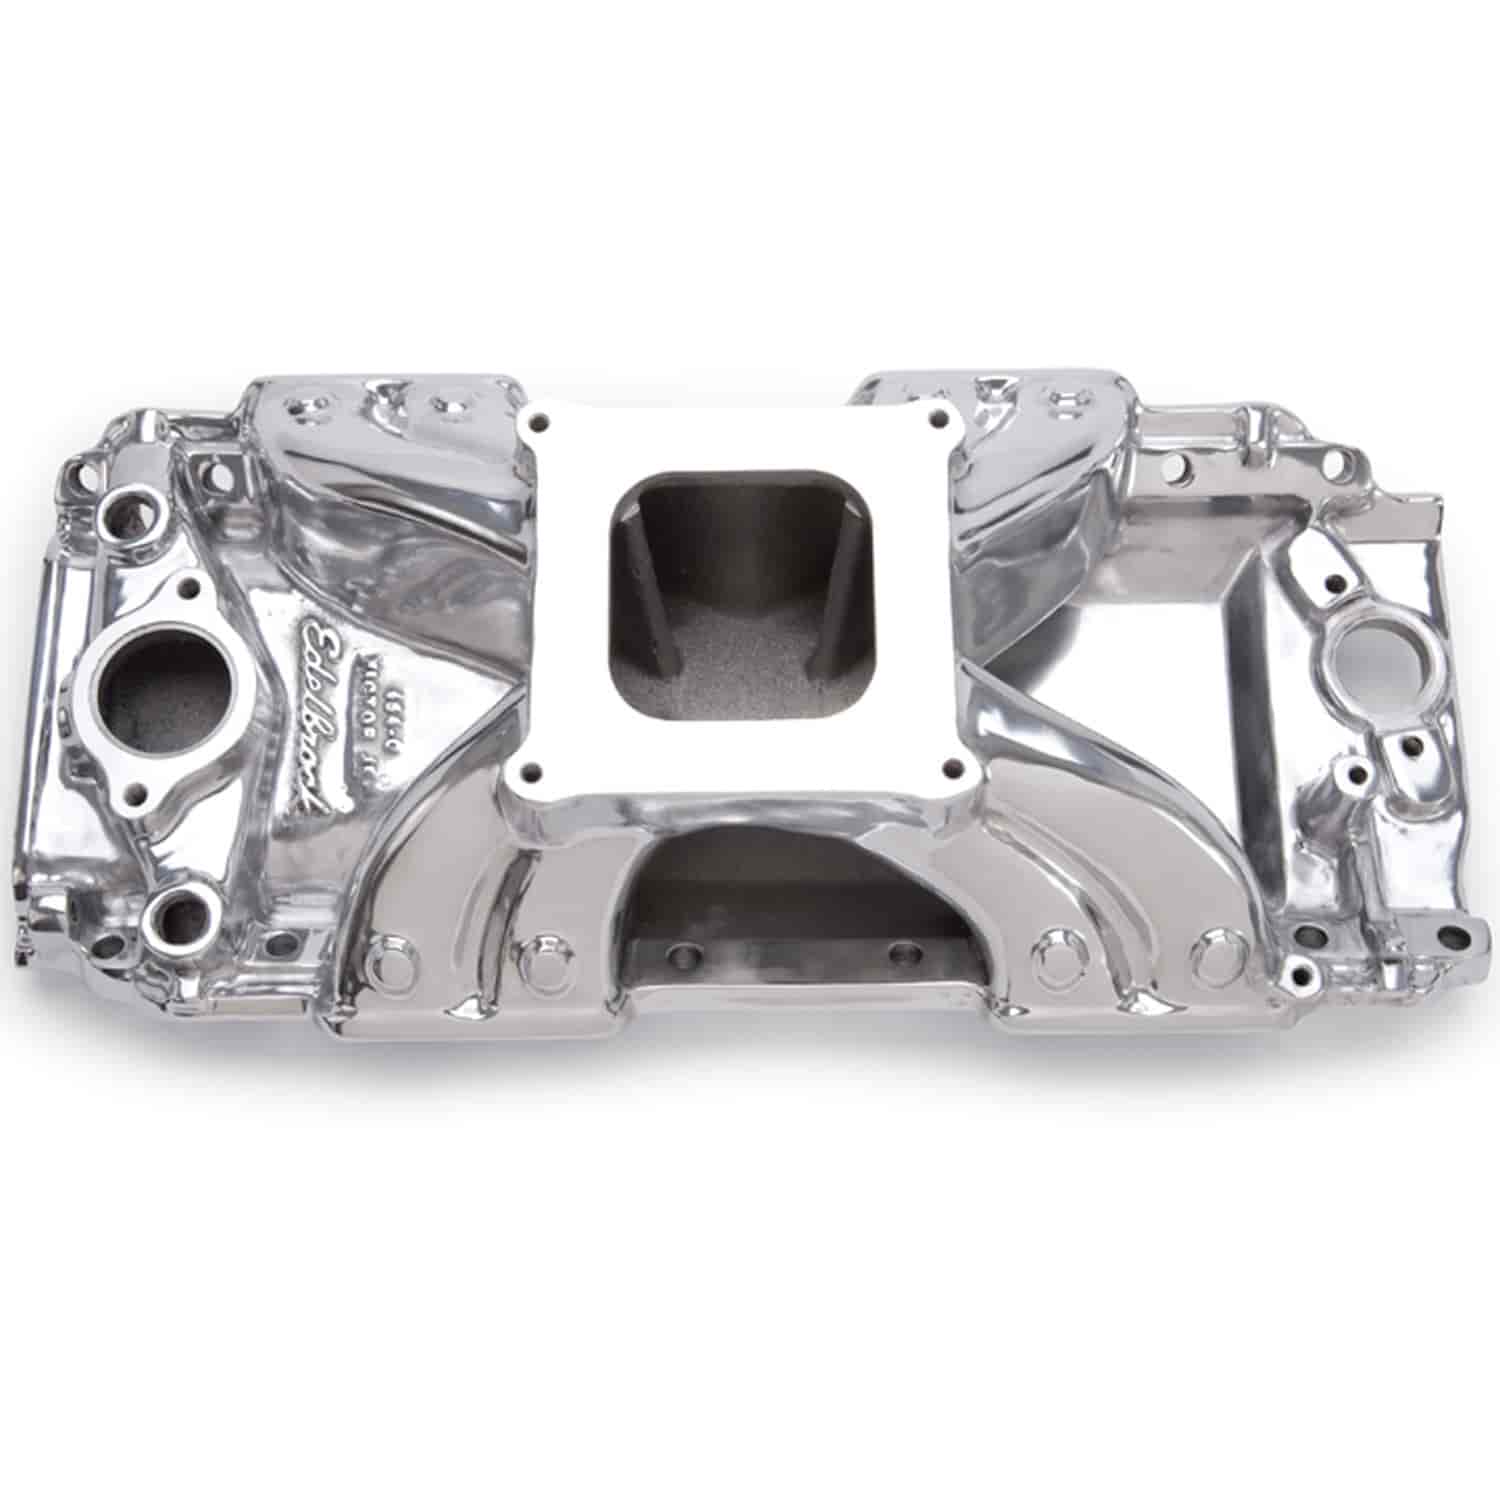 Victor Jr. 454-O Intake Manifold Big Block BB-Chevy with 1975-Earlier large oval port heads